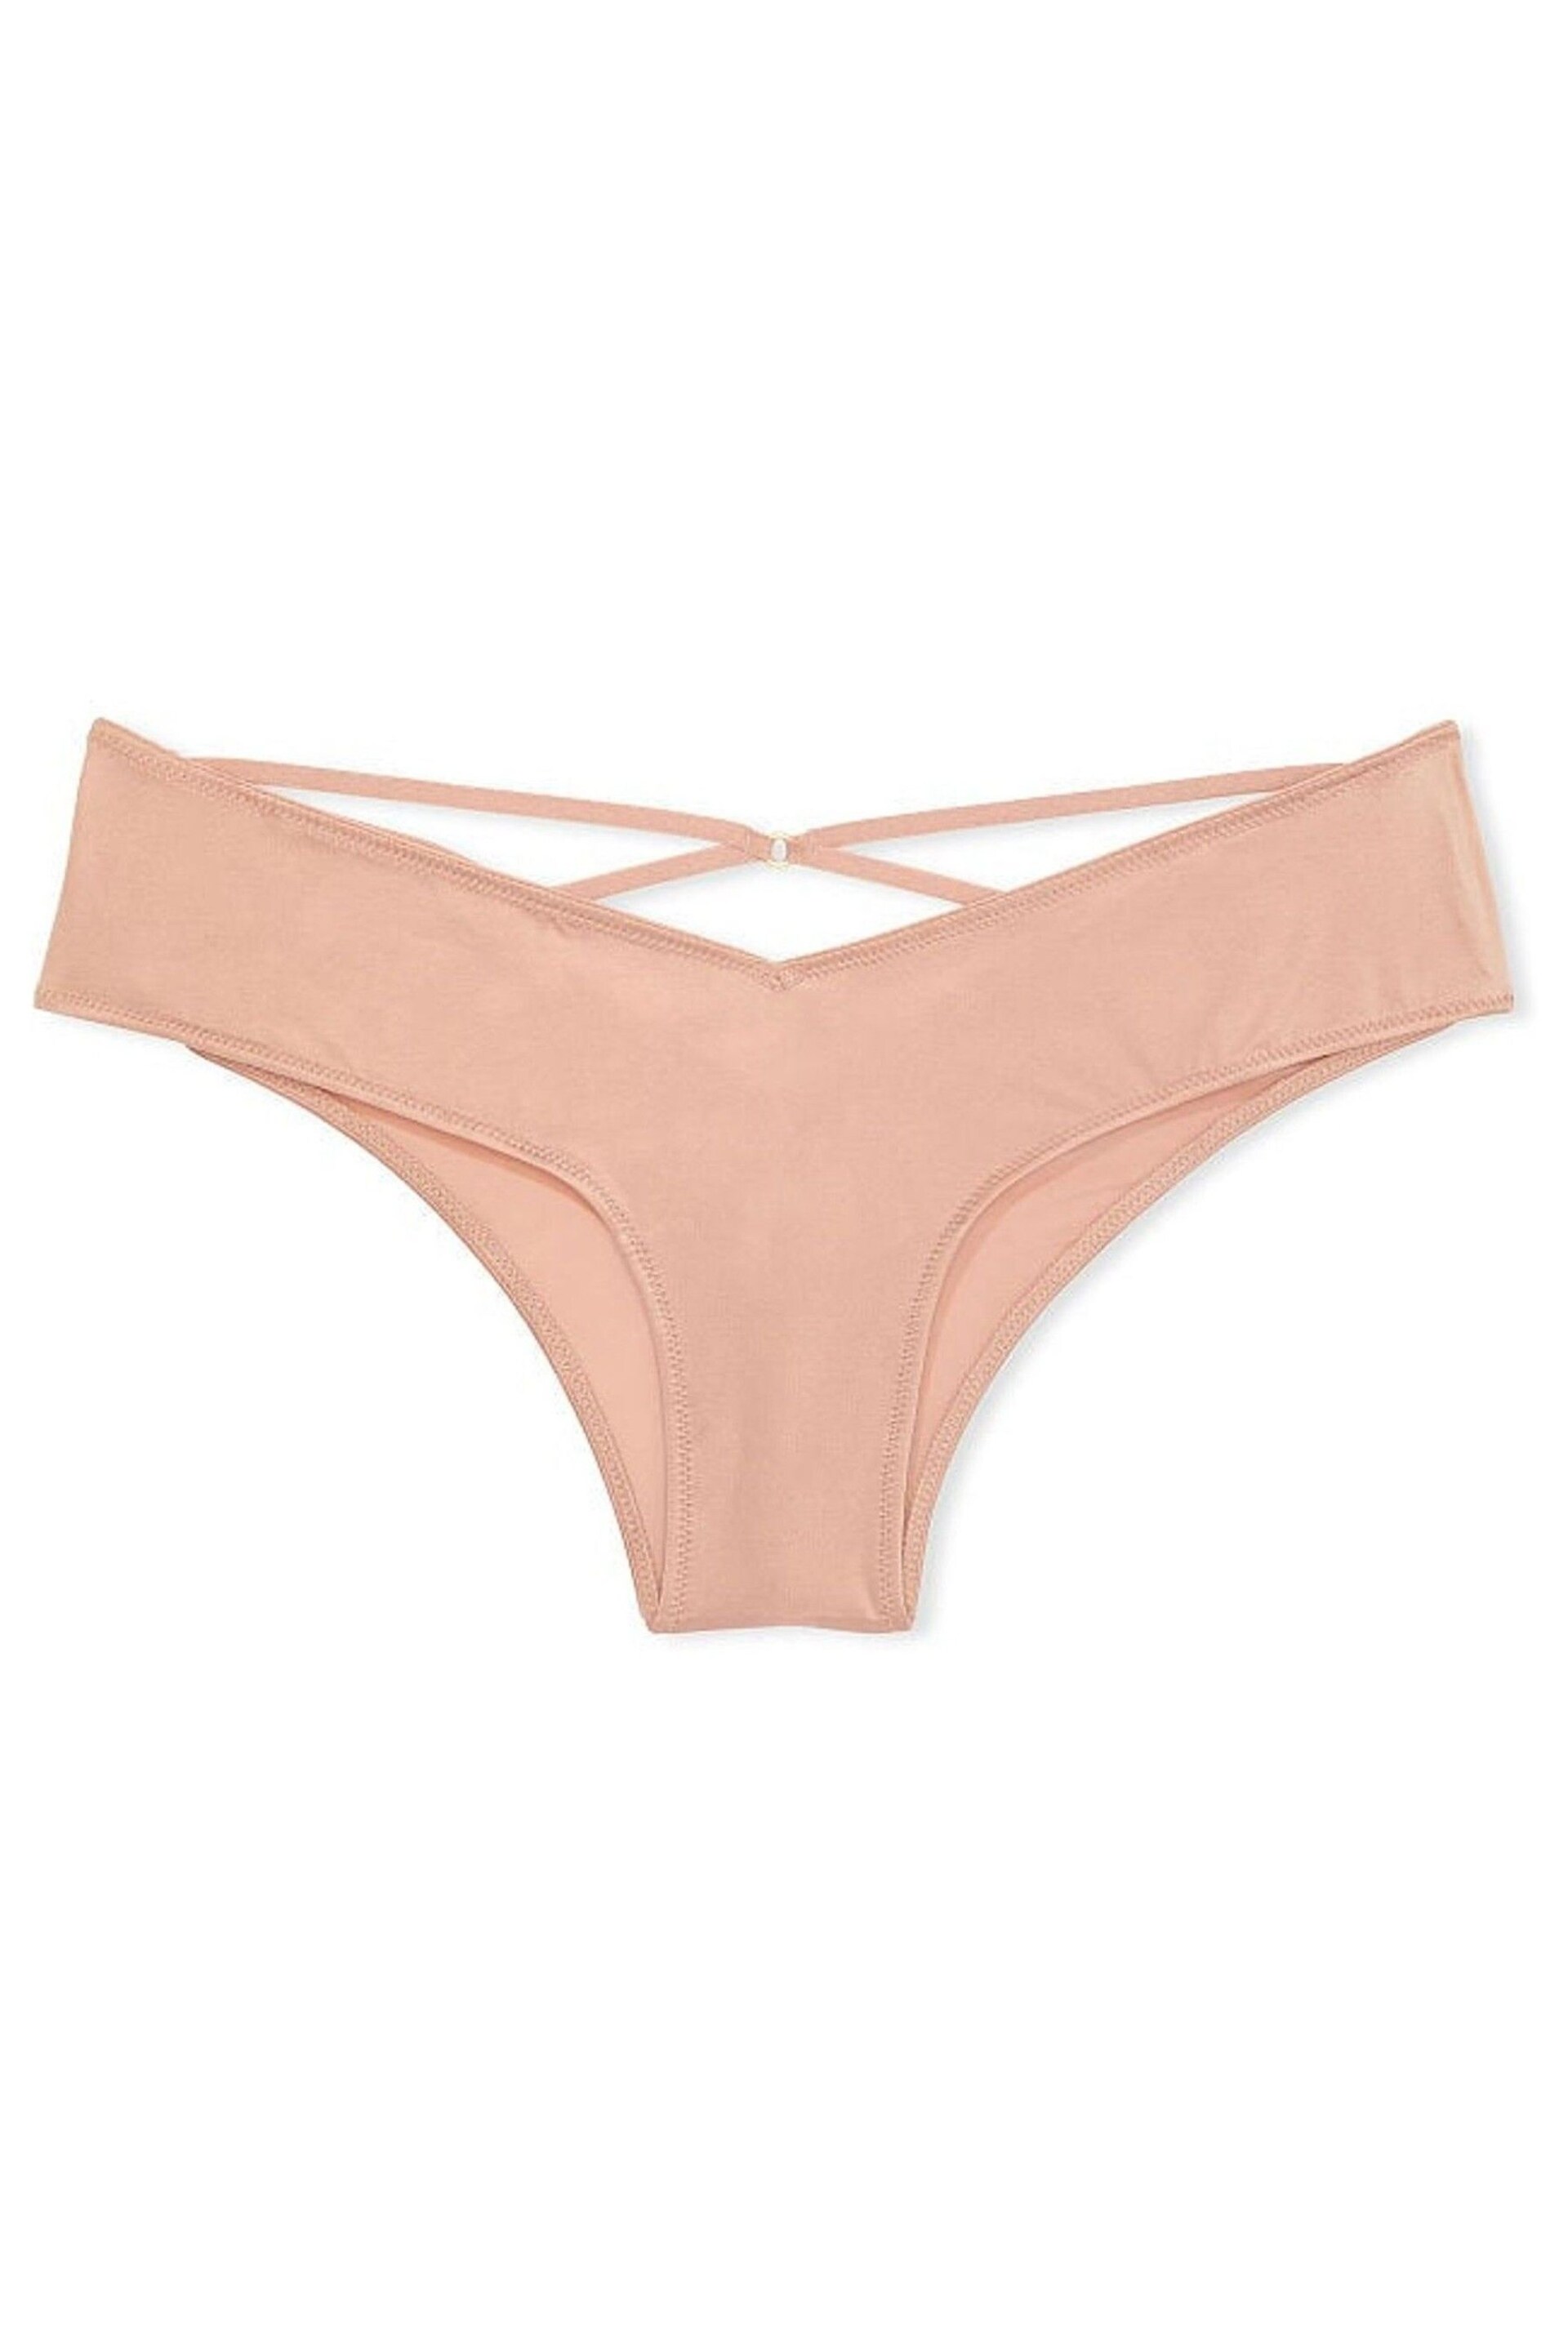 Victoria's Secret Macaron Nude Cheeky Knickers - Image 3 of 3